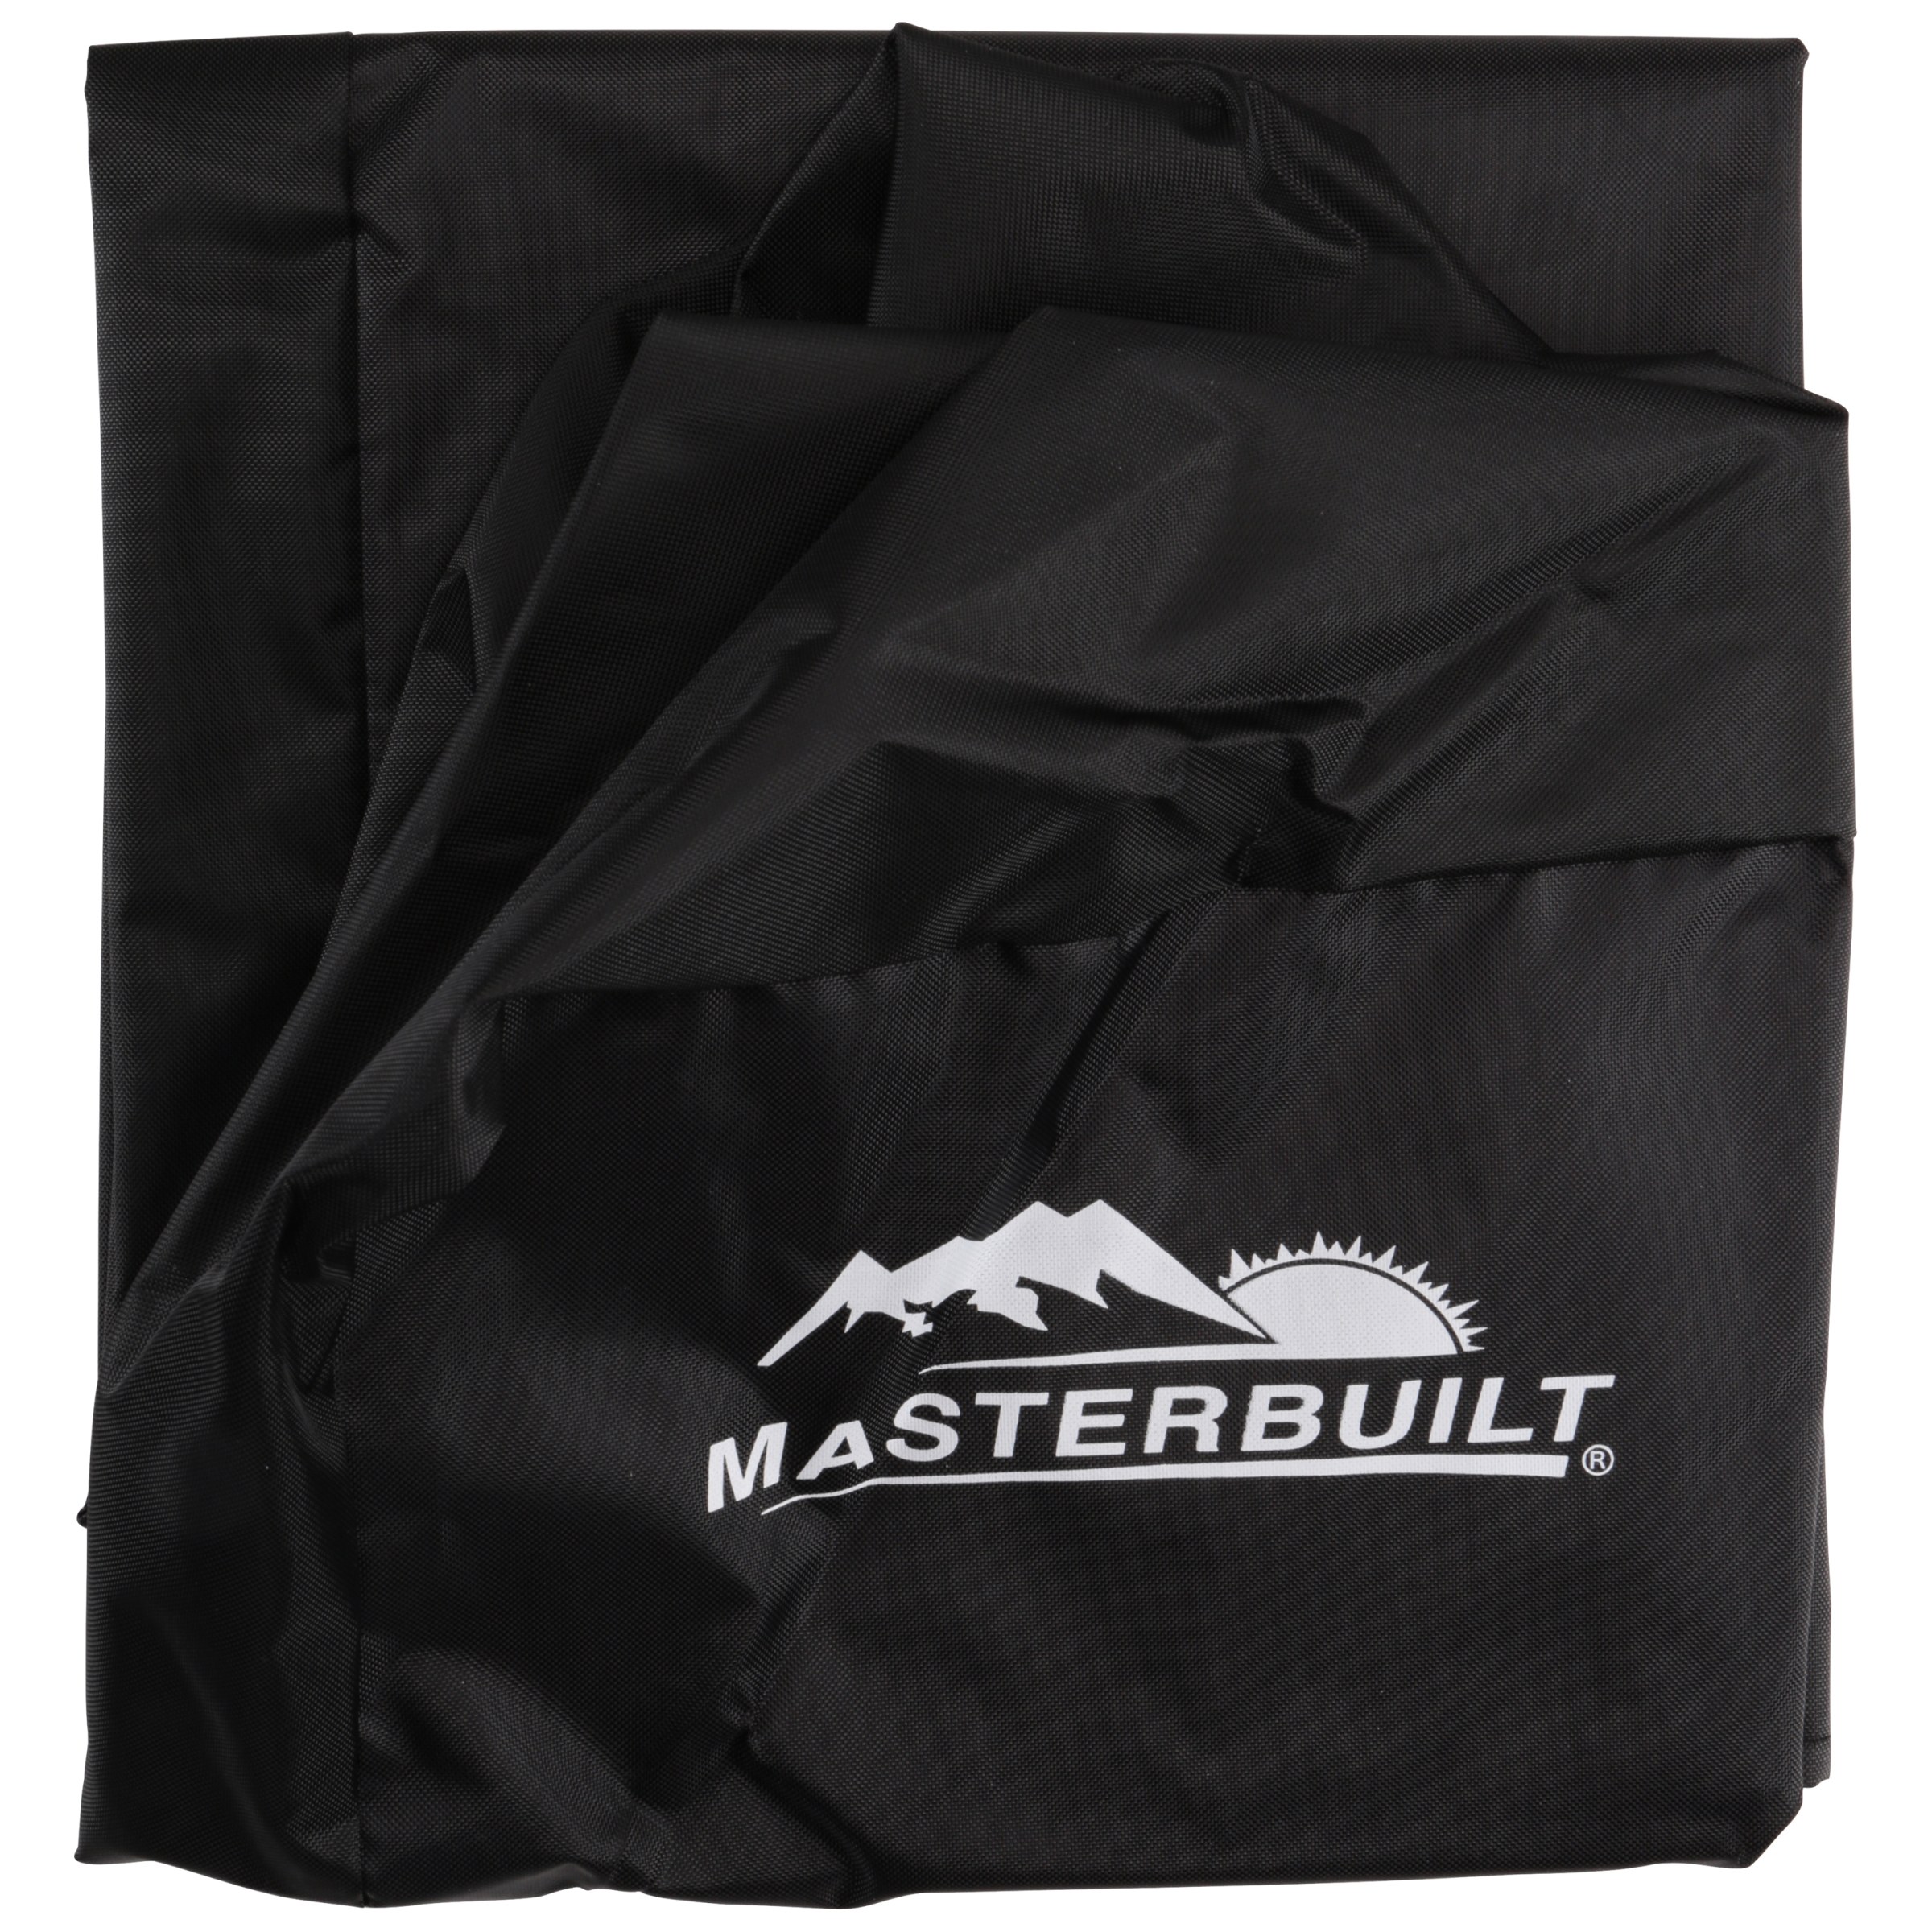 Masterbuilt 12" Electric Smoker Cover - image 1 of 2